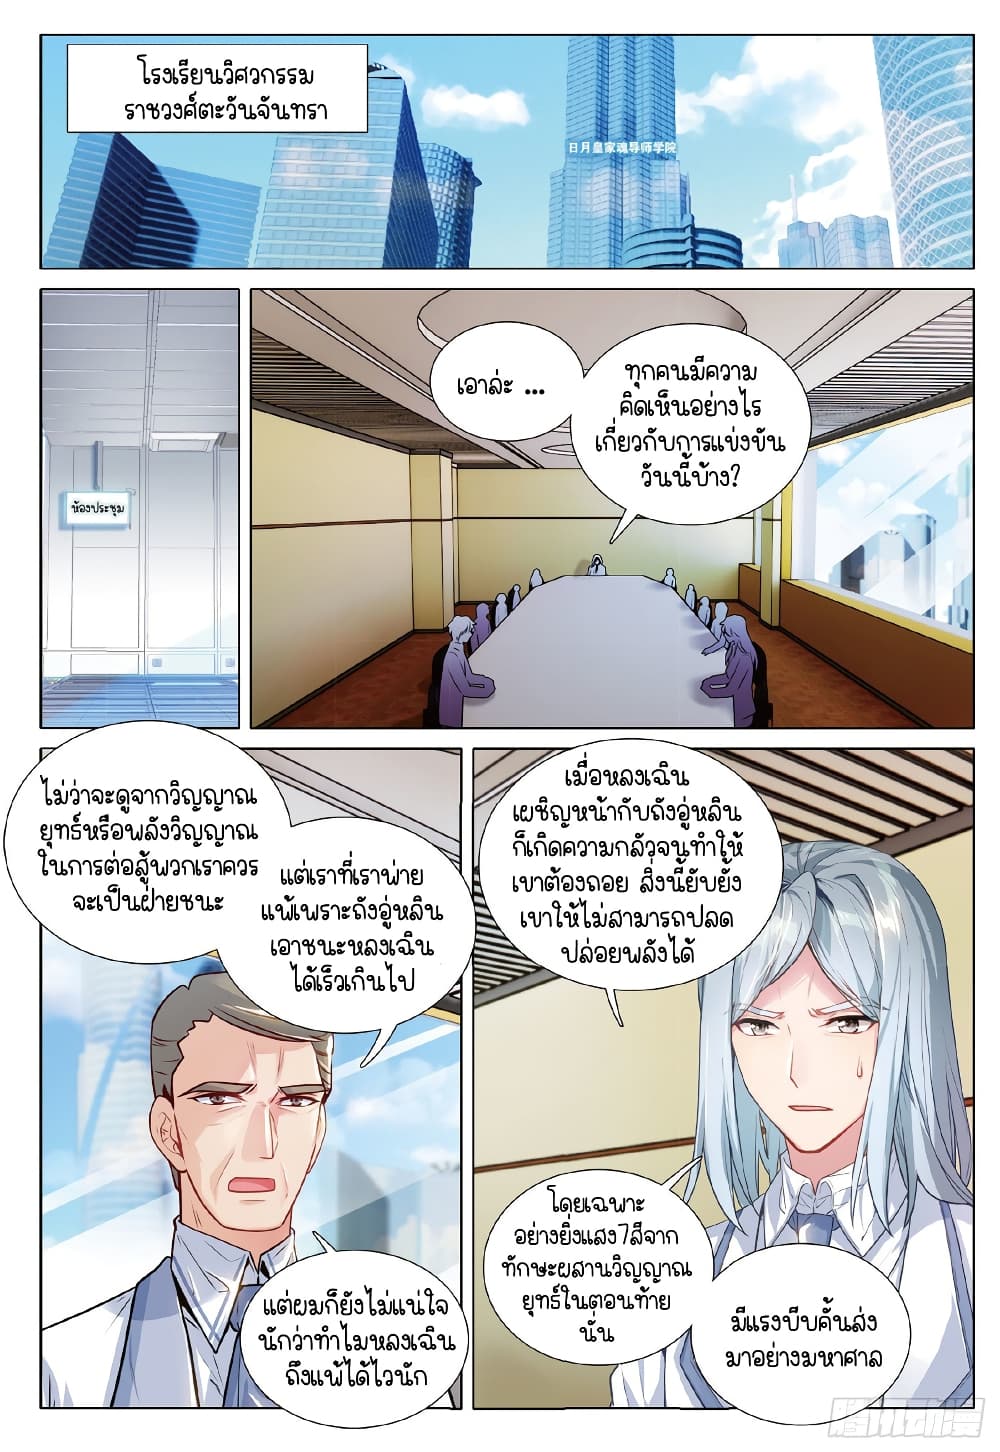 Douluo Dalu 3: The Legend of the Dragon King 270-อุบัติเหตุ